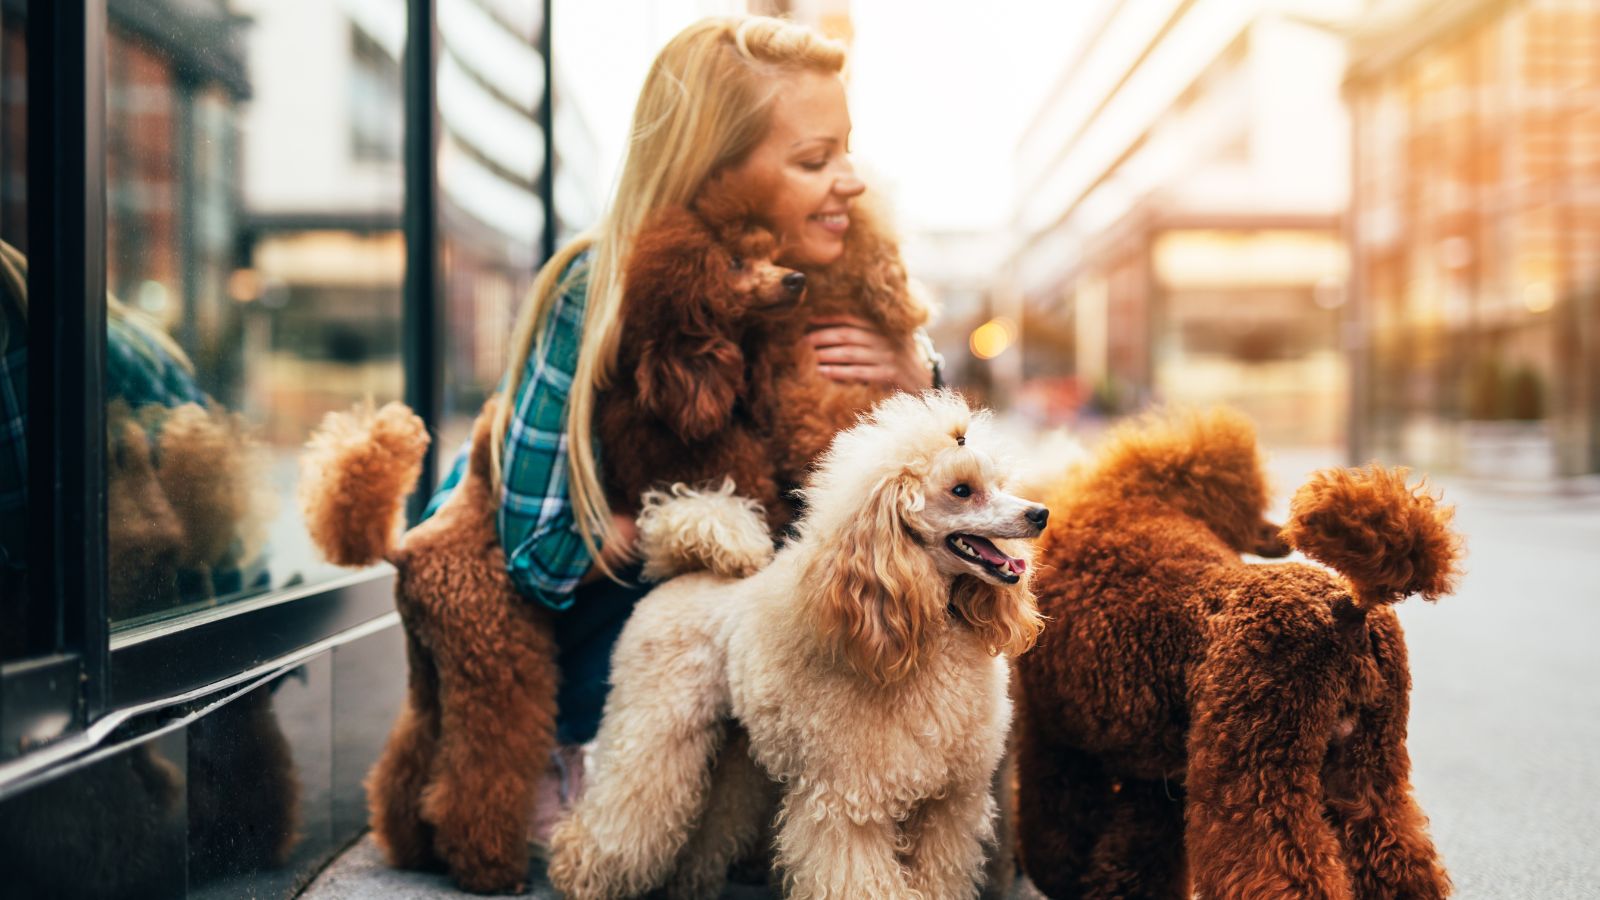 <p>As shared by the <a href="https://www.akc.org/expert-advice/lifestyle/10-facts-about-poodles/#:~:text=Poodles%20are%20among%20the%20smartest,due%20to%20their%20keen%20noses.">American Kennel Club</a>, Poodles can be used as “guide dogs, assistance dogs for people with other physical disabilities, and therapy dogs.” They’re intelligent and easy to train, responding well to commands. Poodles are also patient and very eager to please, making them excellent for the support roles mentioned.</p>